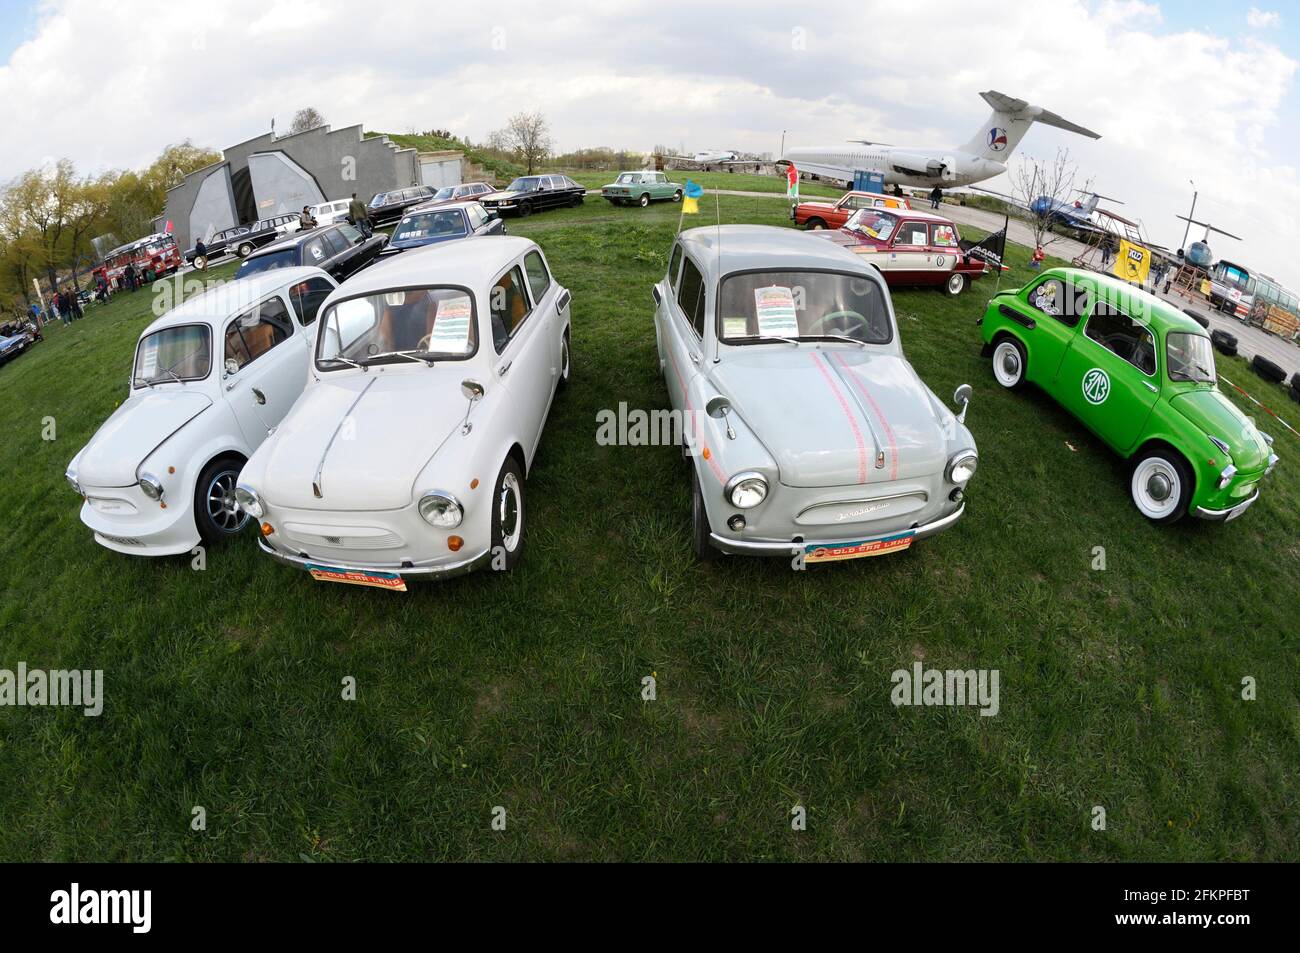 Made in USSR an old cars ZAZ 965 Zaporozhets parked. Festival OLD CAR Land. May 12, 2019. KIev, Ukraine Stock Photo